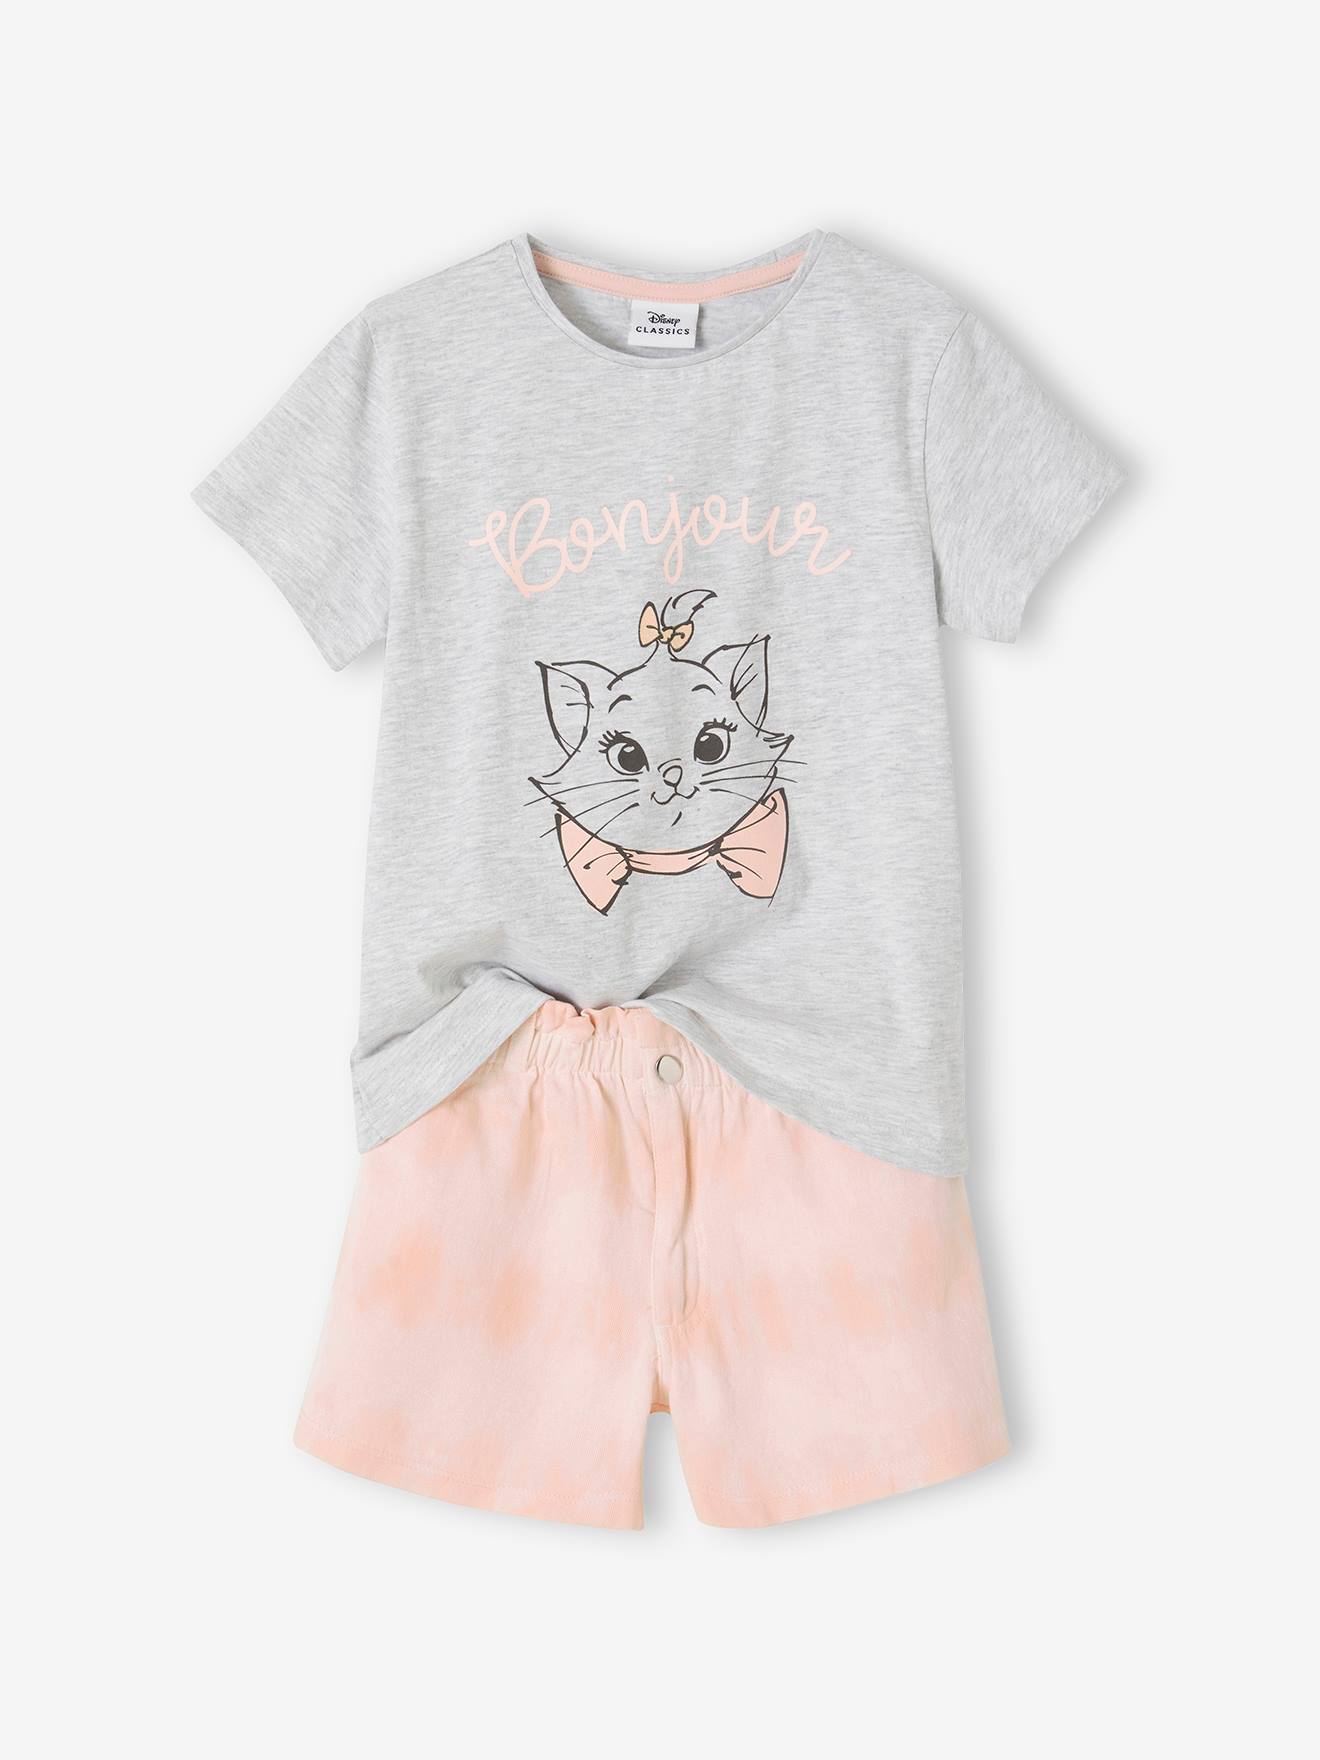 Marie of The Aristocats T-Shirt + Shorts Combo by Disney(r) for Girls pale pink